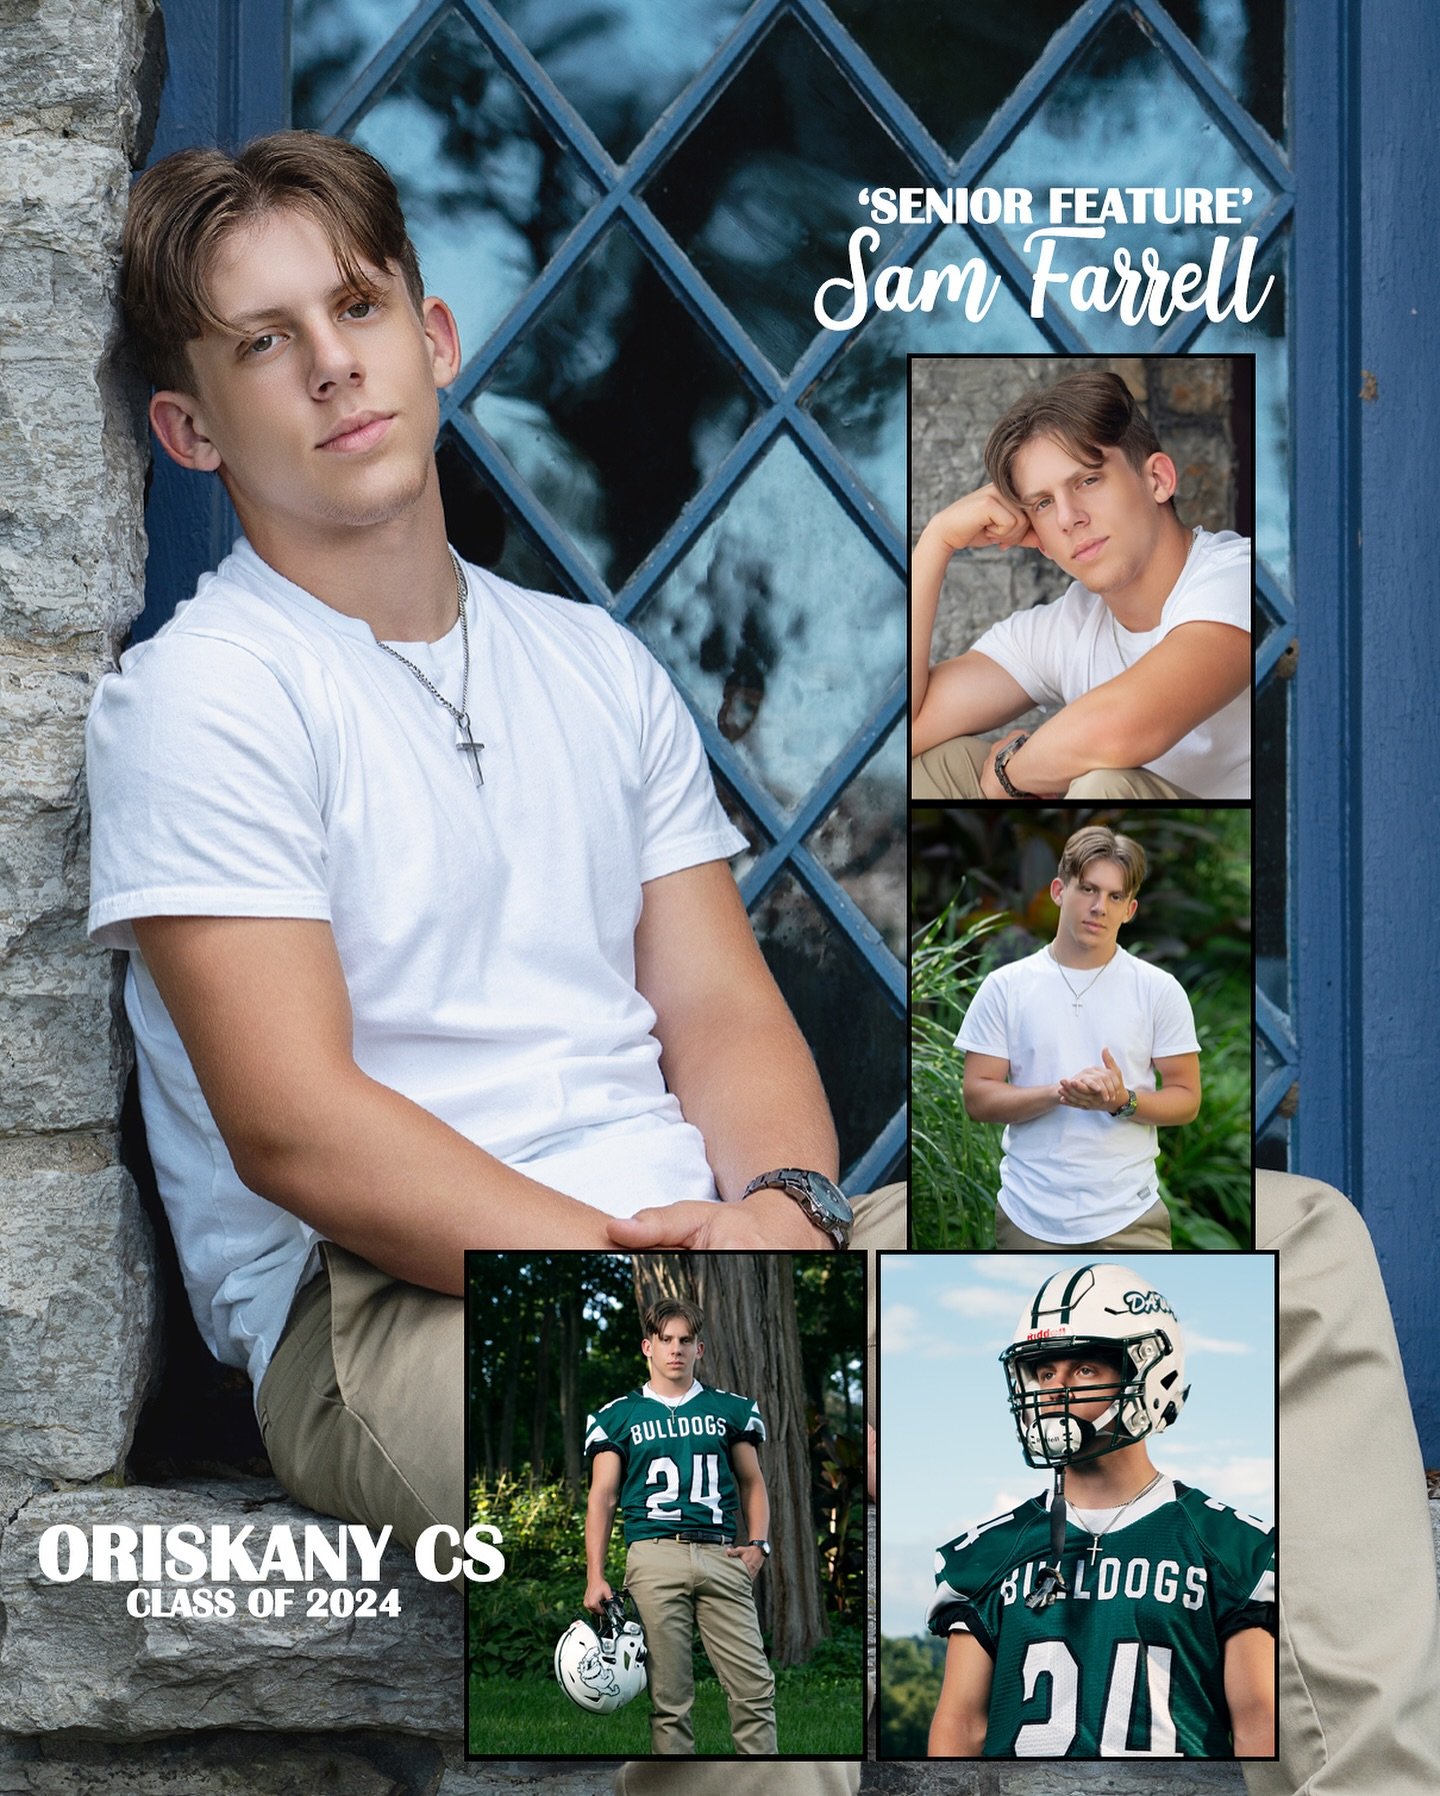 SENIOR FEATURE! Sam Farrell 
Oriskany Central School 
#Classof2024
#ETPSeniorFeature 
@sam.f24_ 

Congratulations Sam on your high school career, and all the best to you on your future endeavors. I&rsquo;m so grateful for the opportunity to photograp